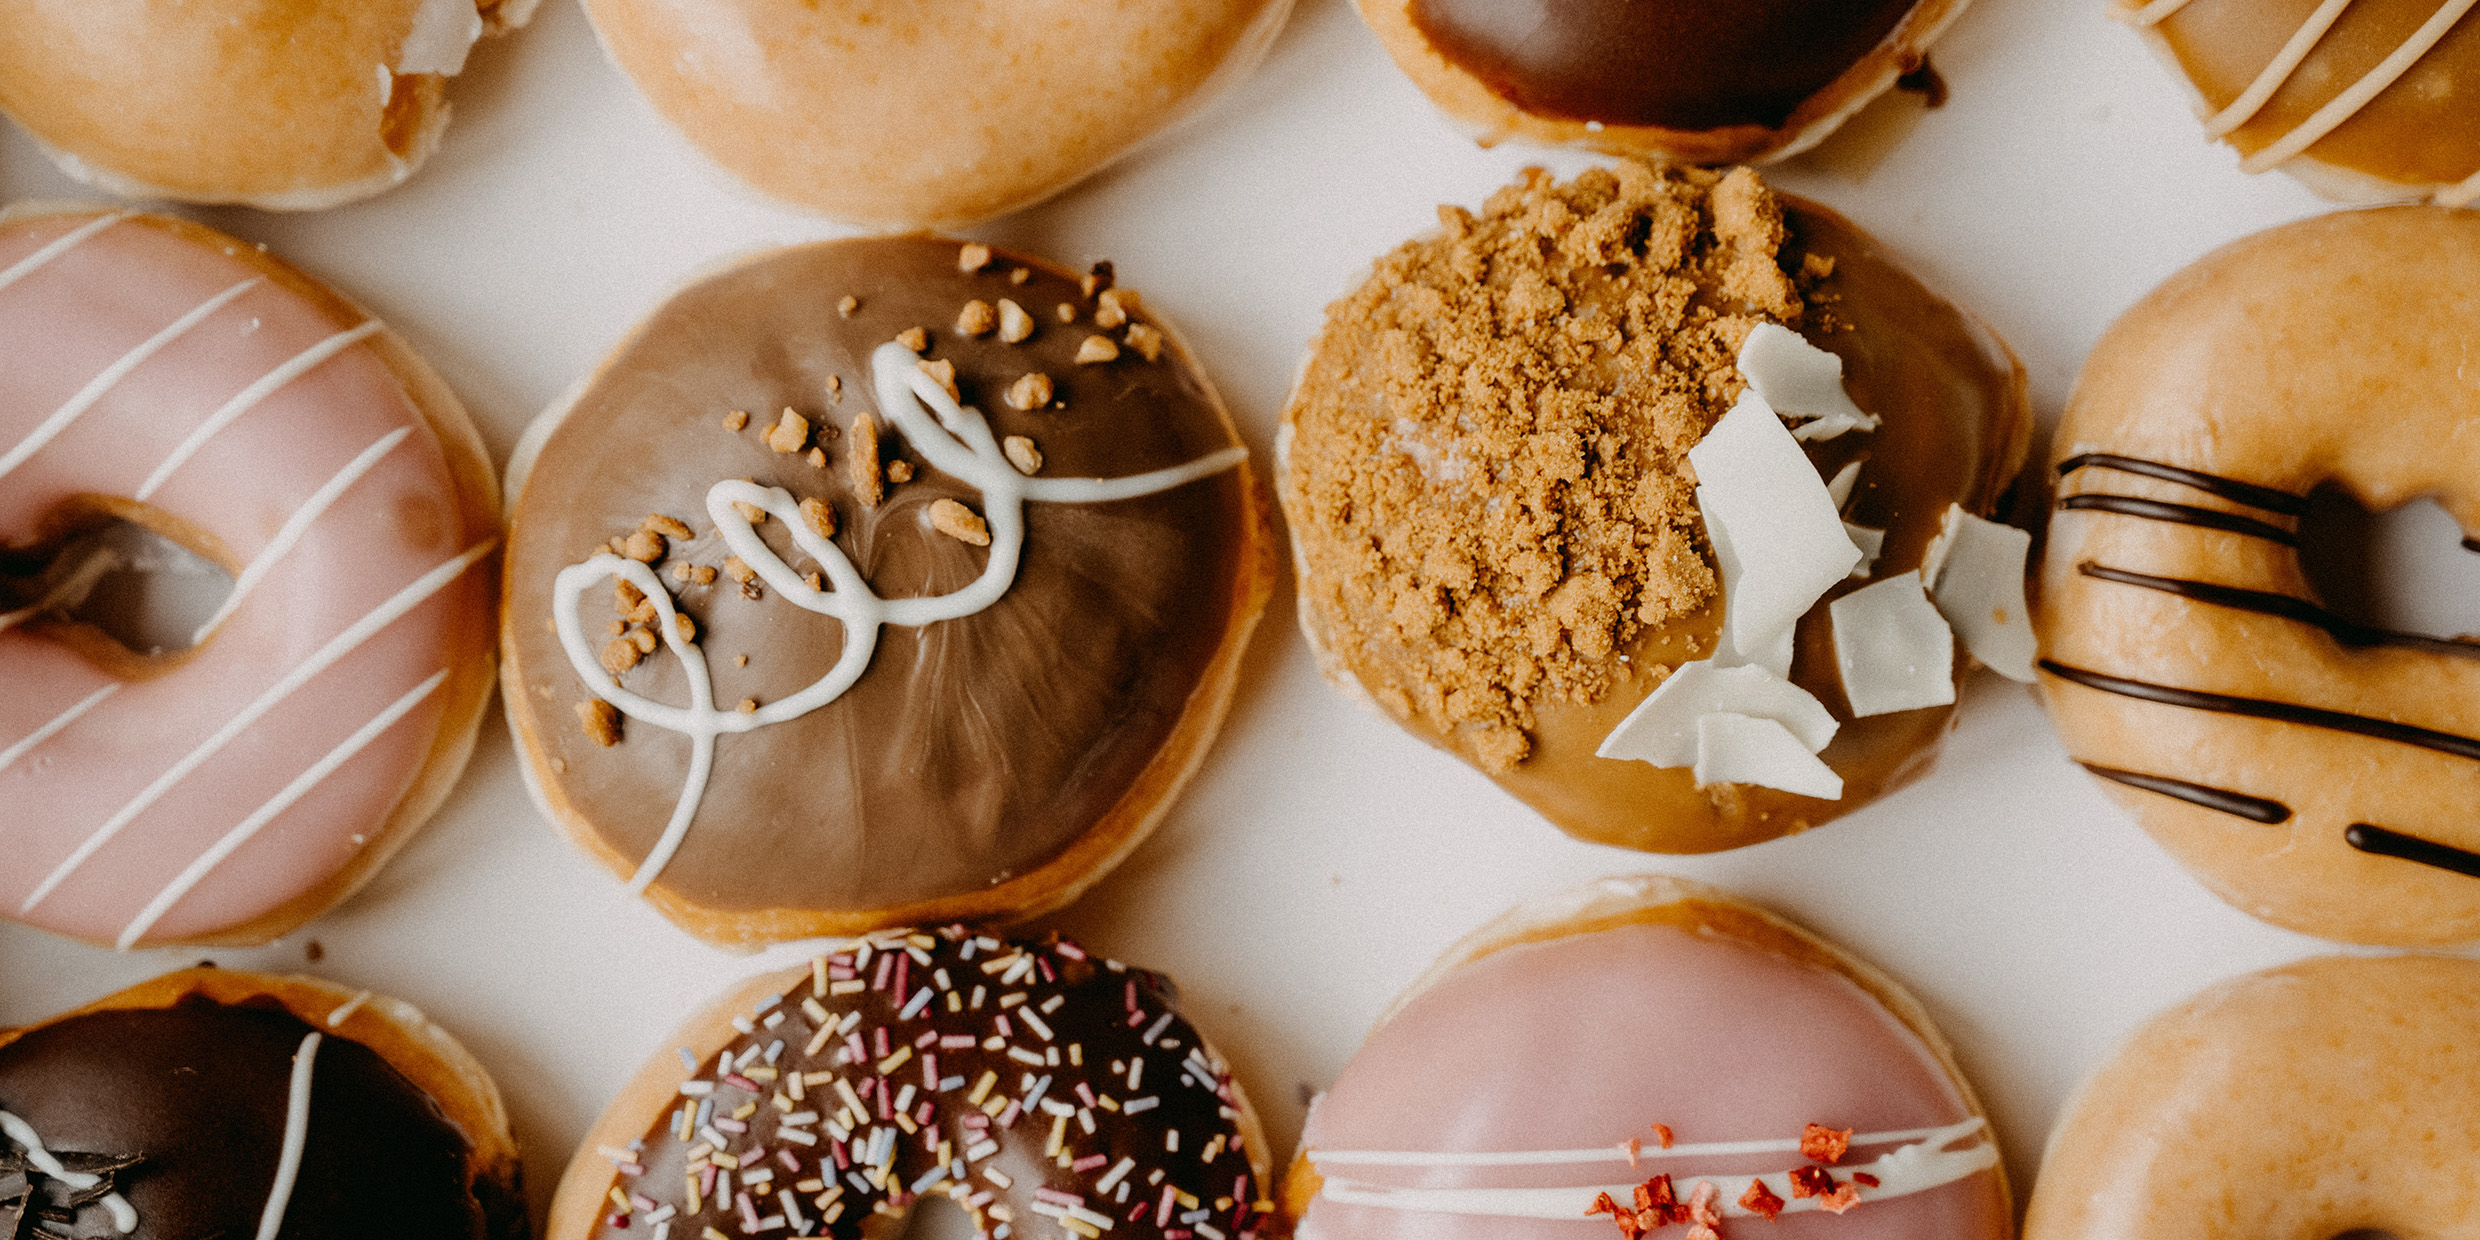 Image of an assortment of frosted doughnuts